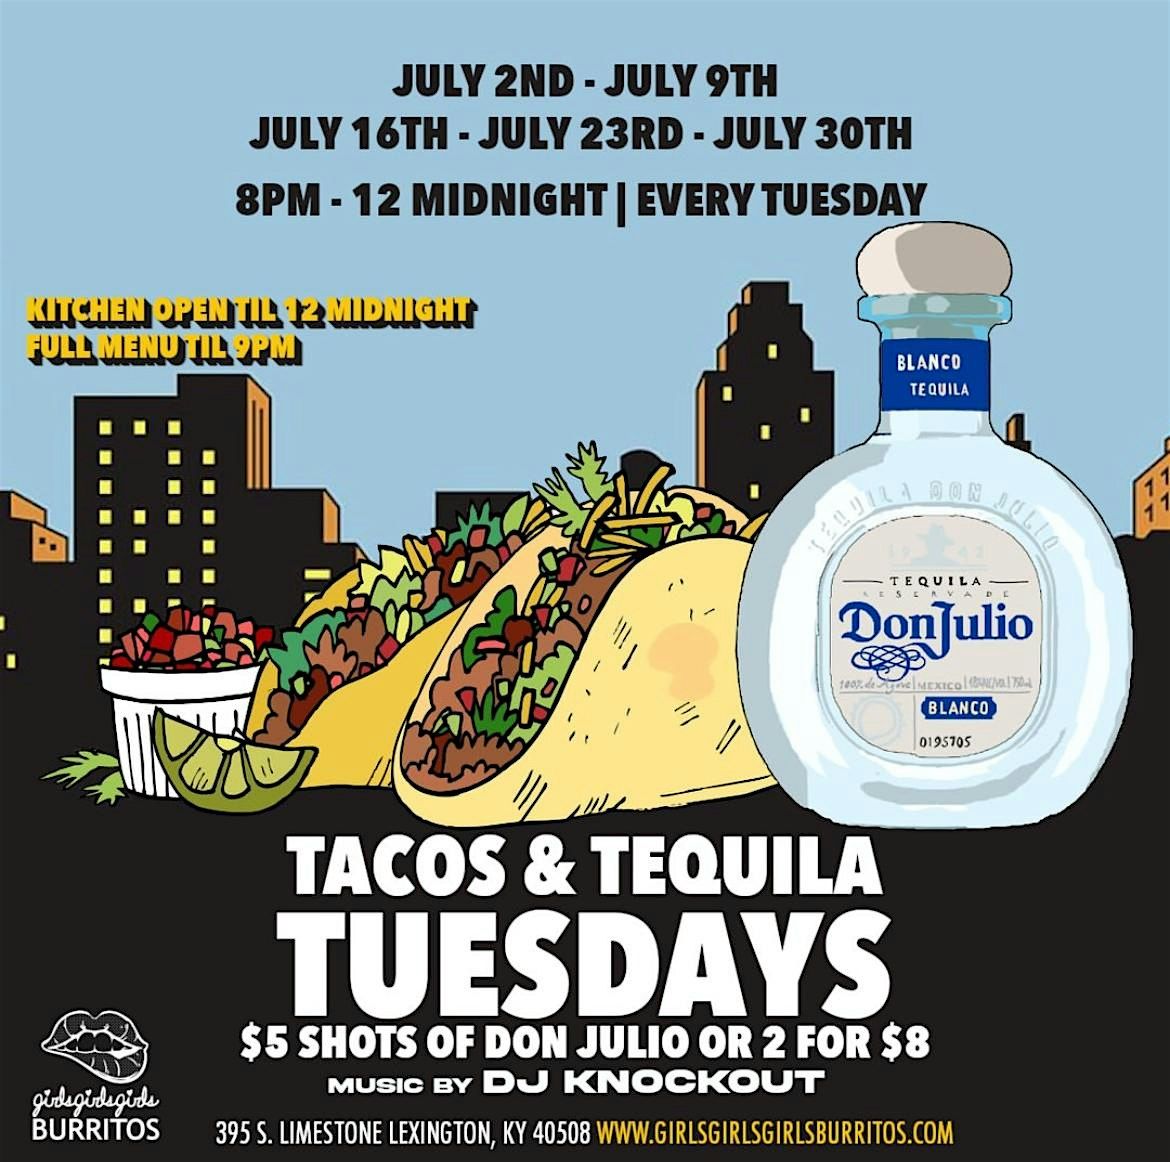 TACO & TEQUILA TUESDAY at girls!